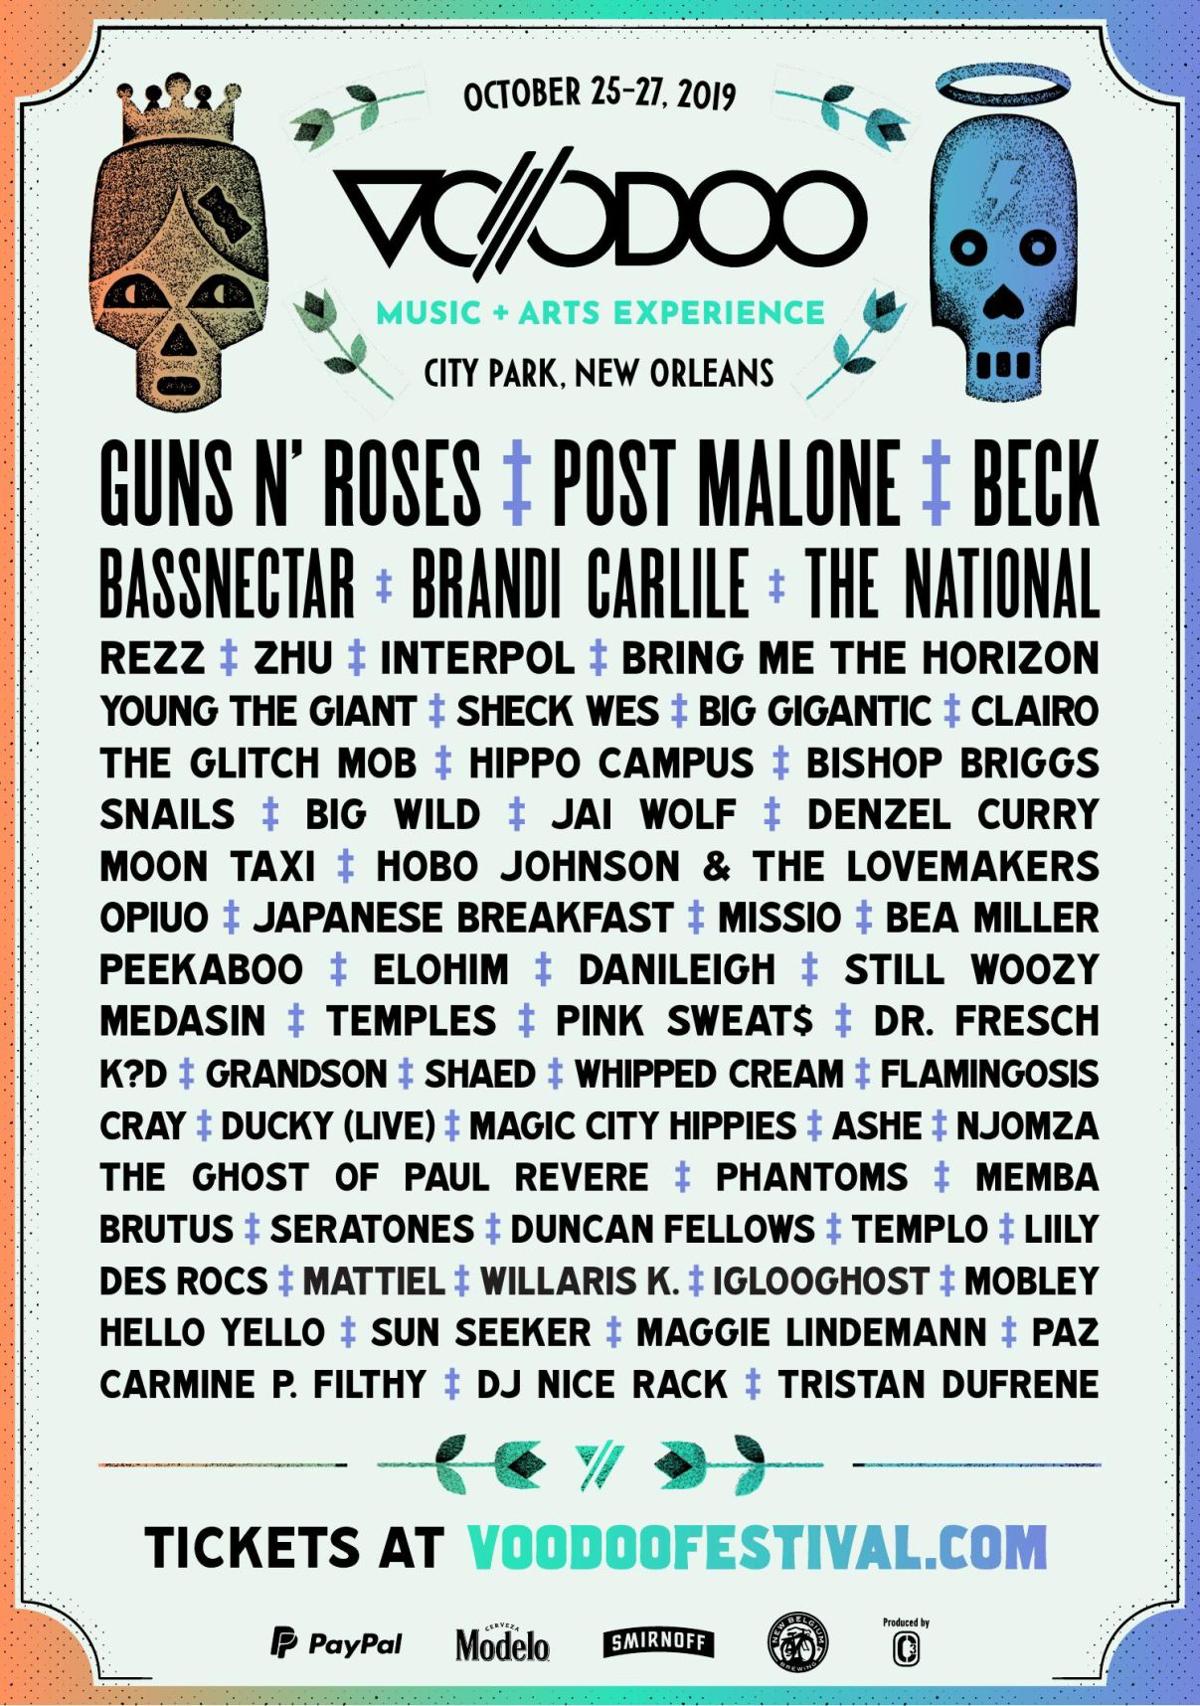 Voodoo Fest 2019 complete lineup Guns N’ Roses, Post Malone, Beck